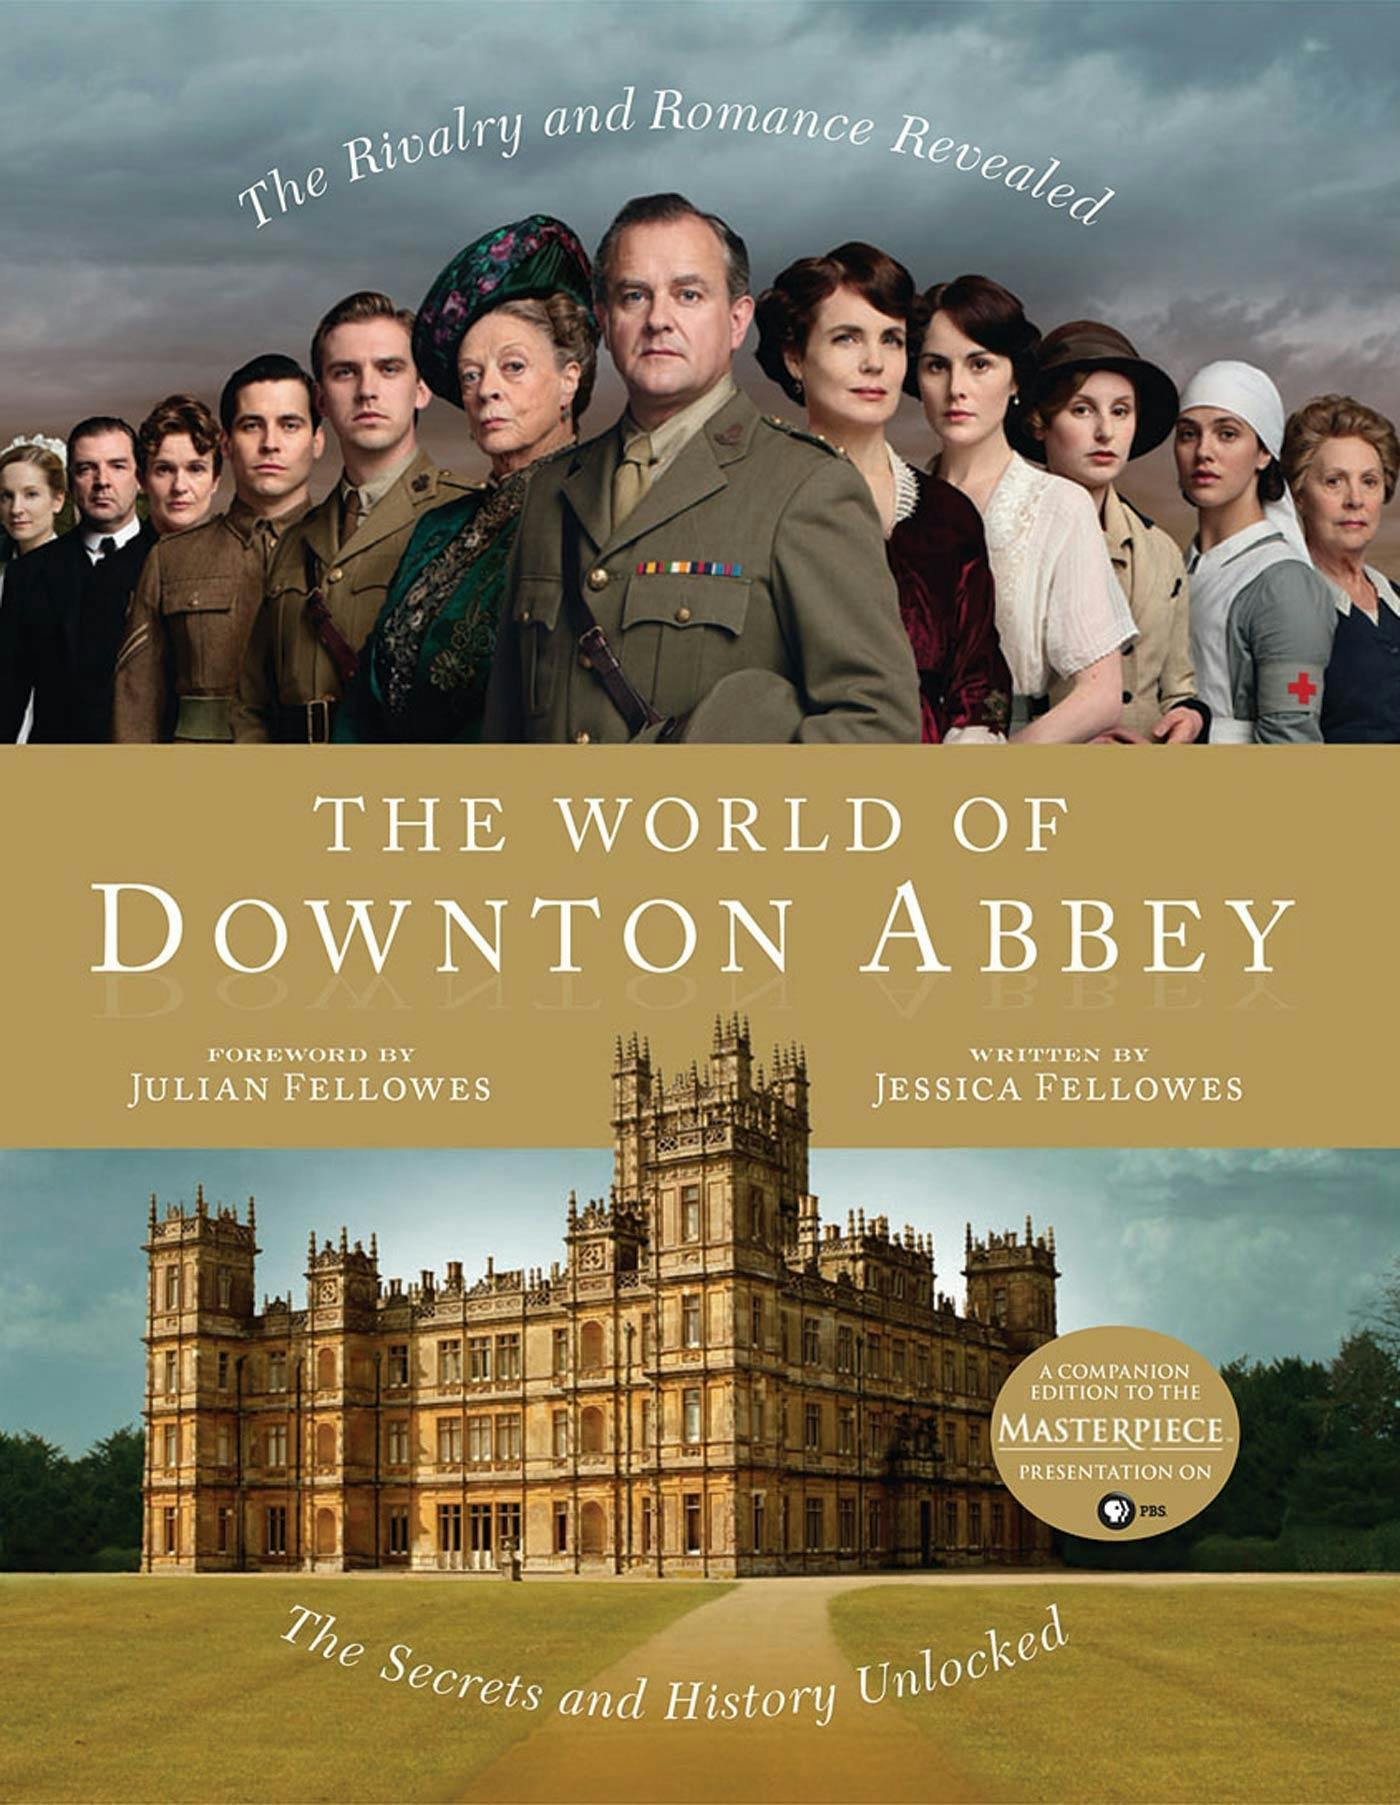 Image of The World of Downton Abbey